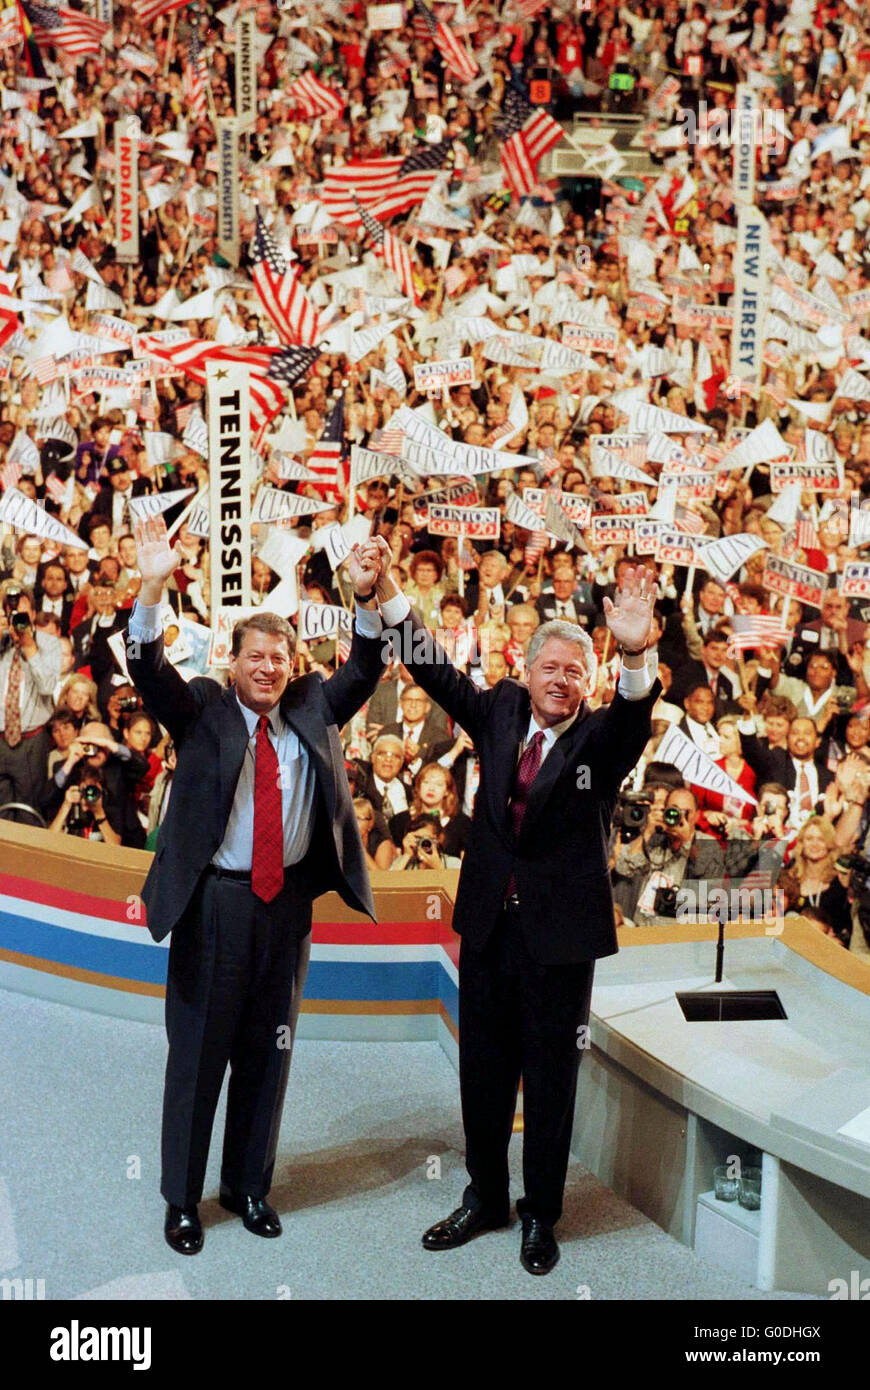 American President Bill Clinton and Vice-President Al Gore at the The 1996 National Convention of the U.S. Democratic Party was held at the United Center in Chicago, Illinois from August 26 to August 29, 1996. President Bill Clinton and Vice President Al Gore celebrate after their nomination for reeelection during the Democratic Party National Convention held in Chicago in 1996. This was the first national convention of either party to be held in Chicago since the disastrous riots of the 1968 Democratic convention. Stock Photo